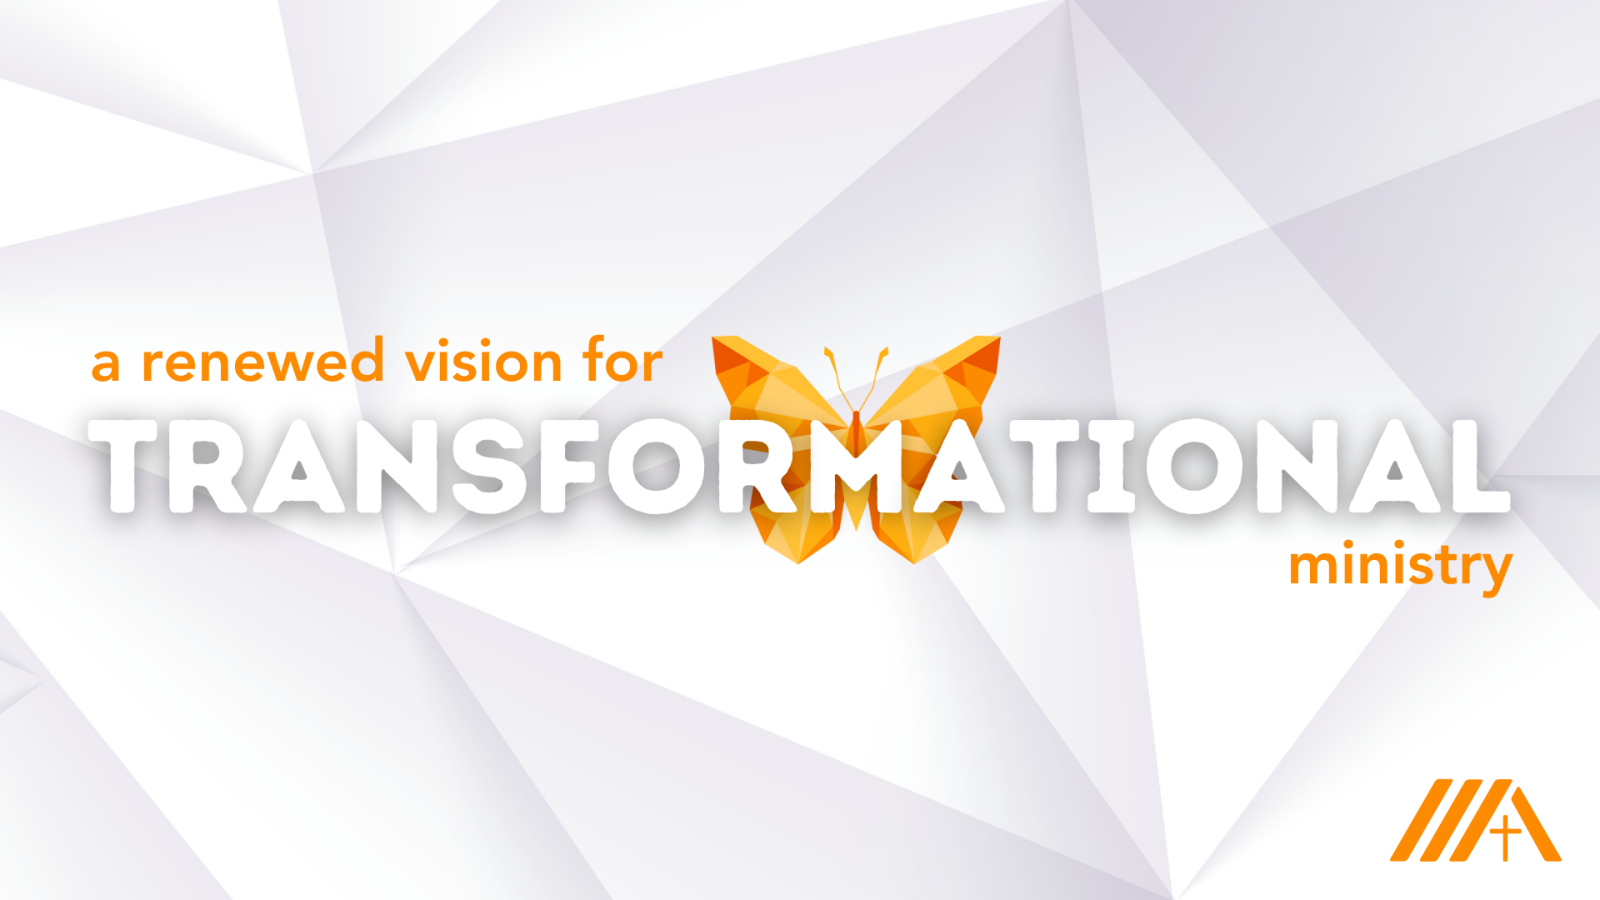 A Renewed Vision for Transformational Ministry